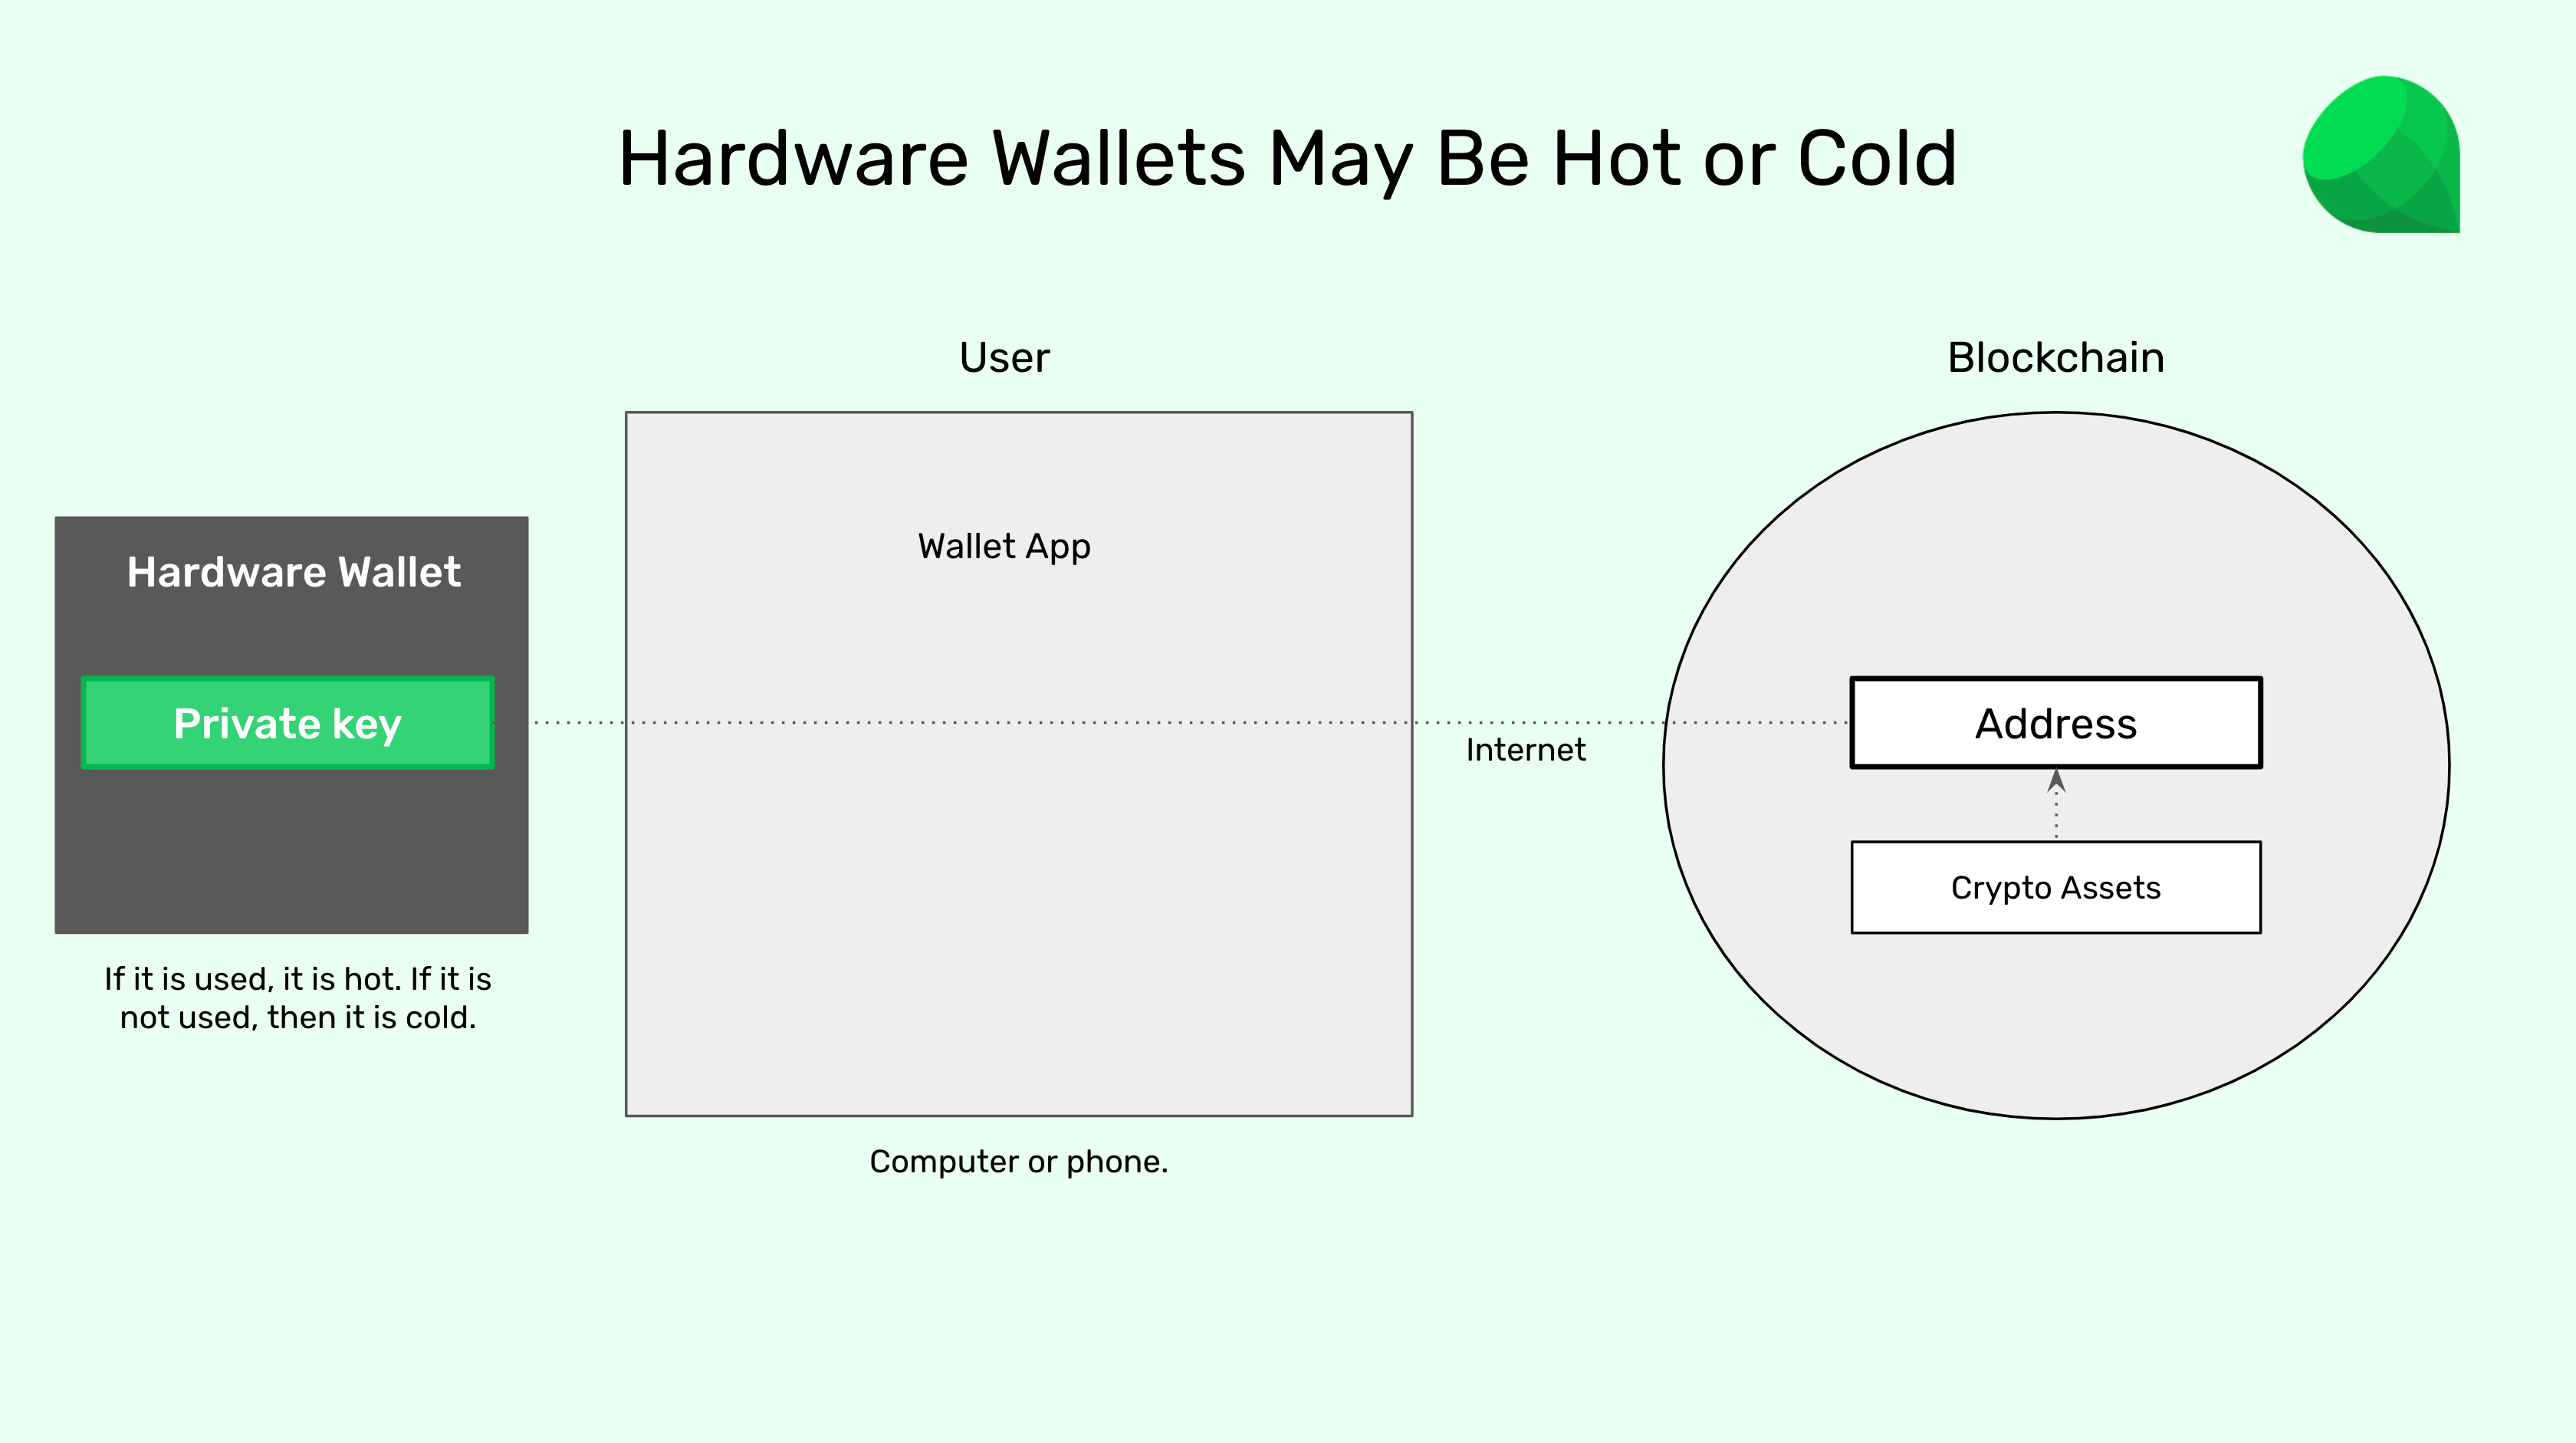 Hardware wallets may be hot or cold